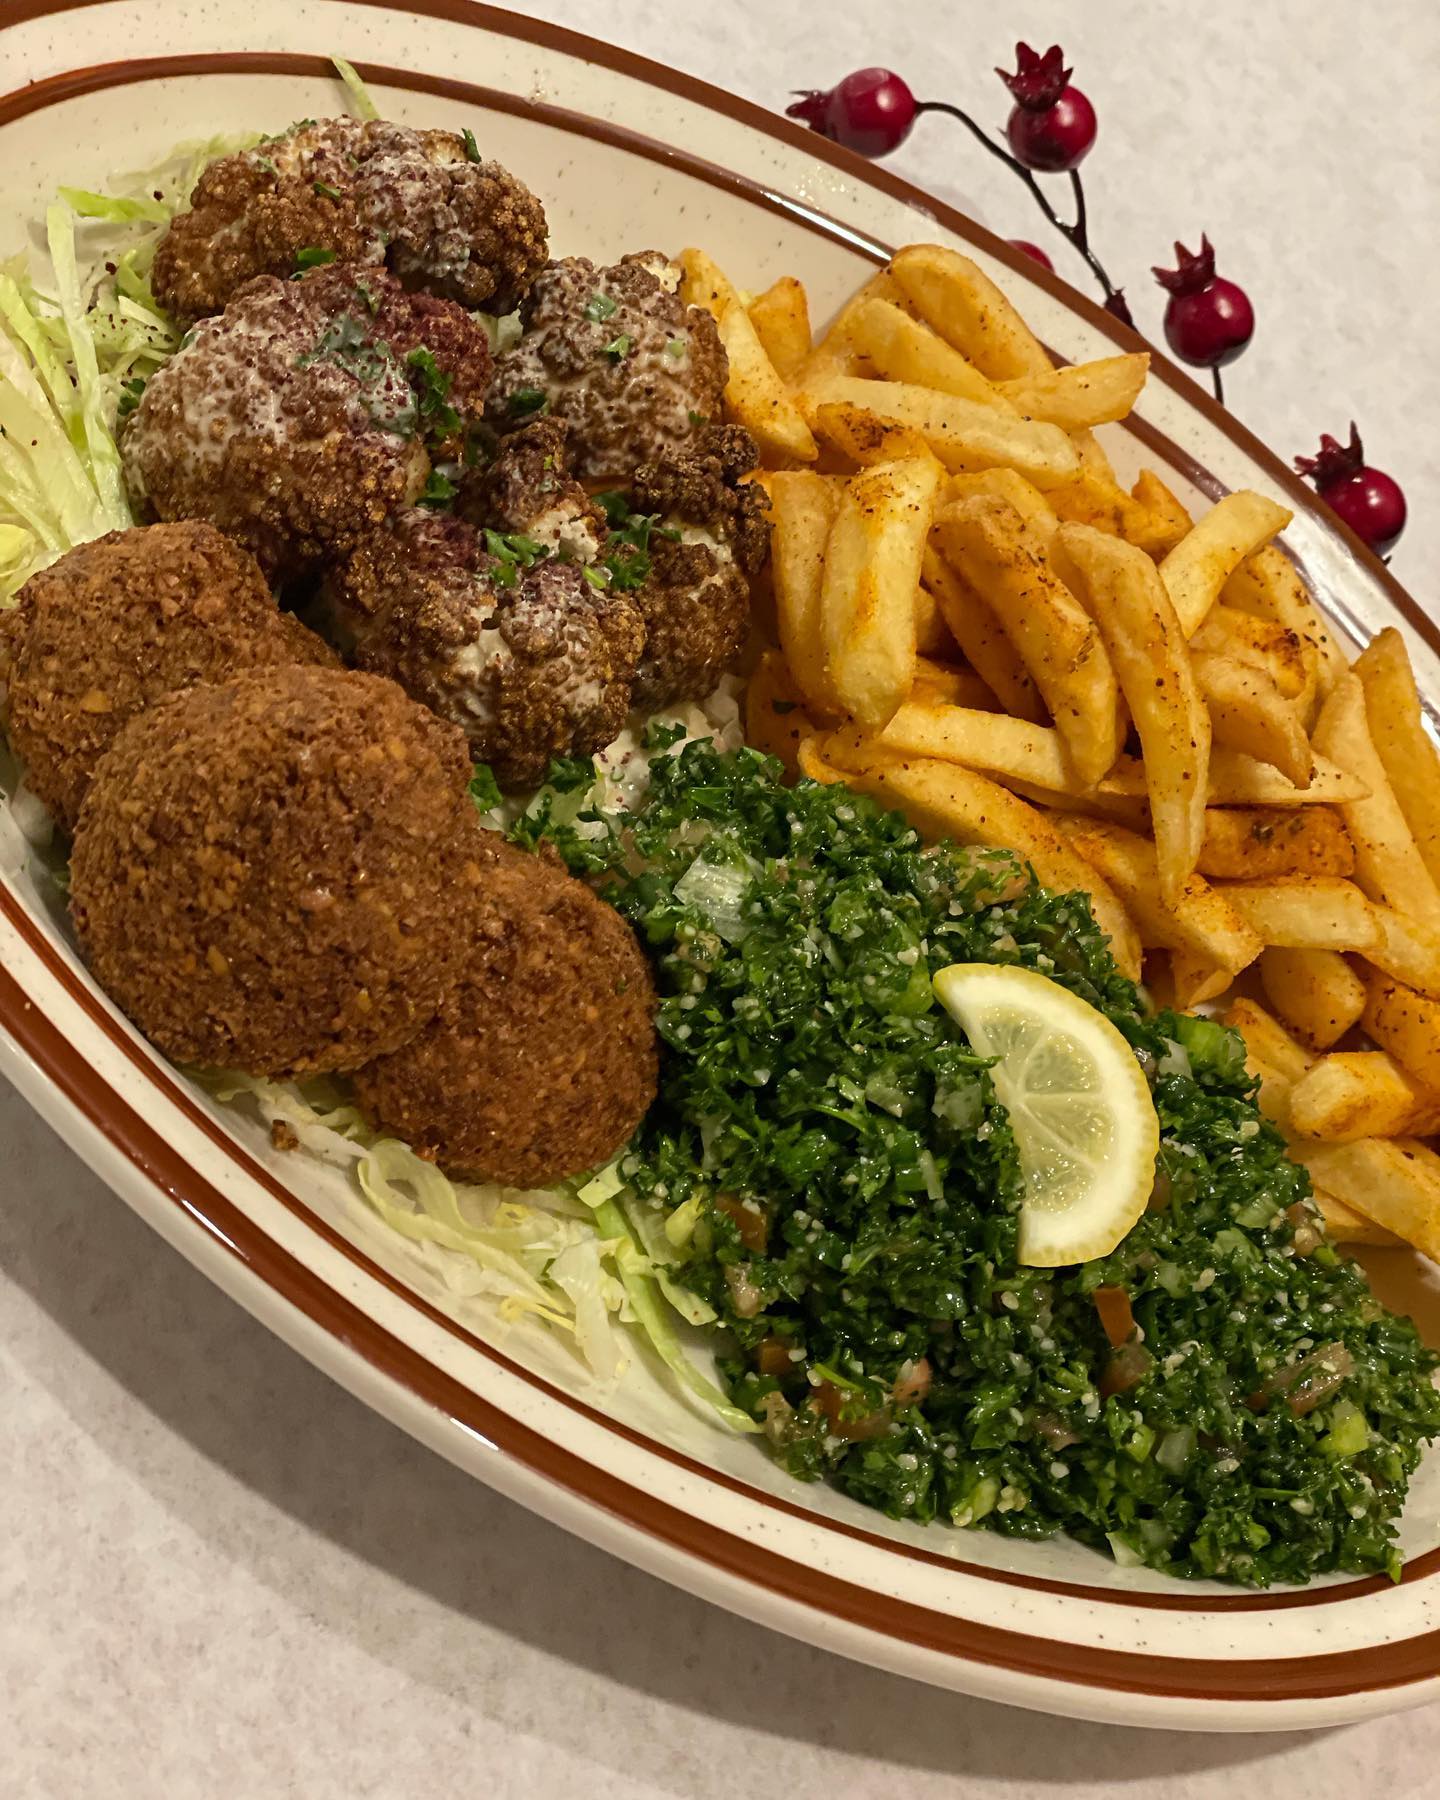 A plate of falafel and fries and rice and salad.